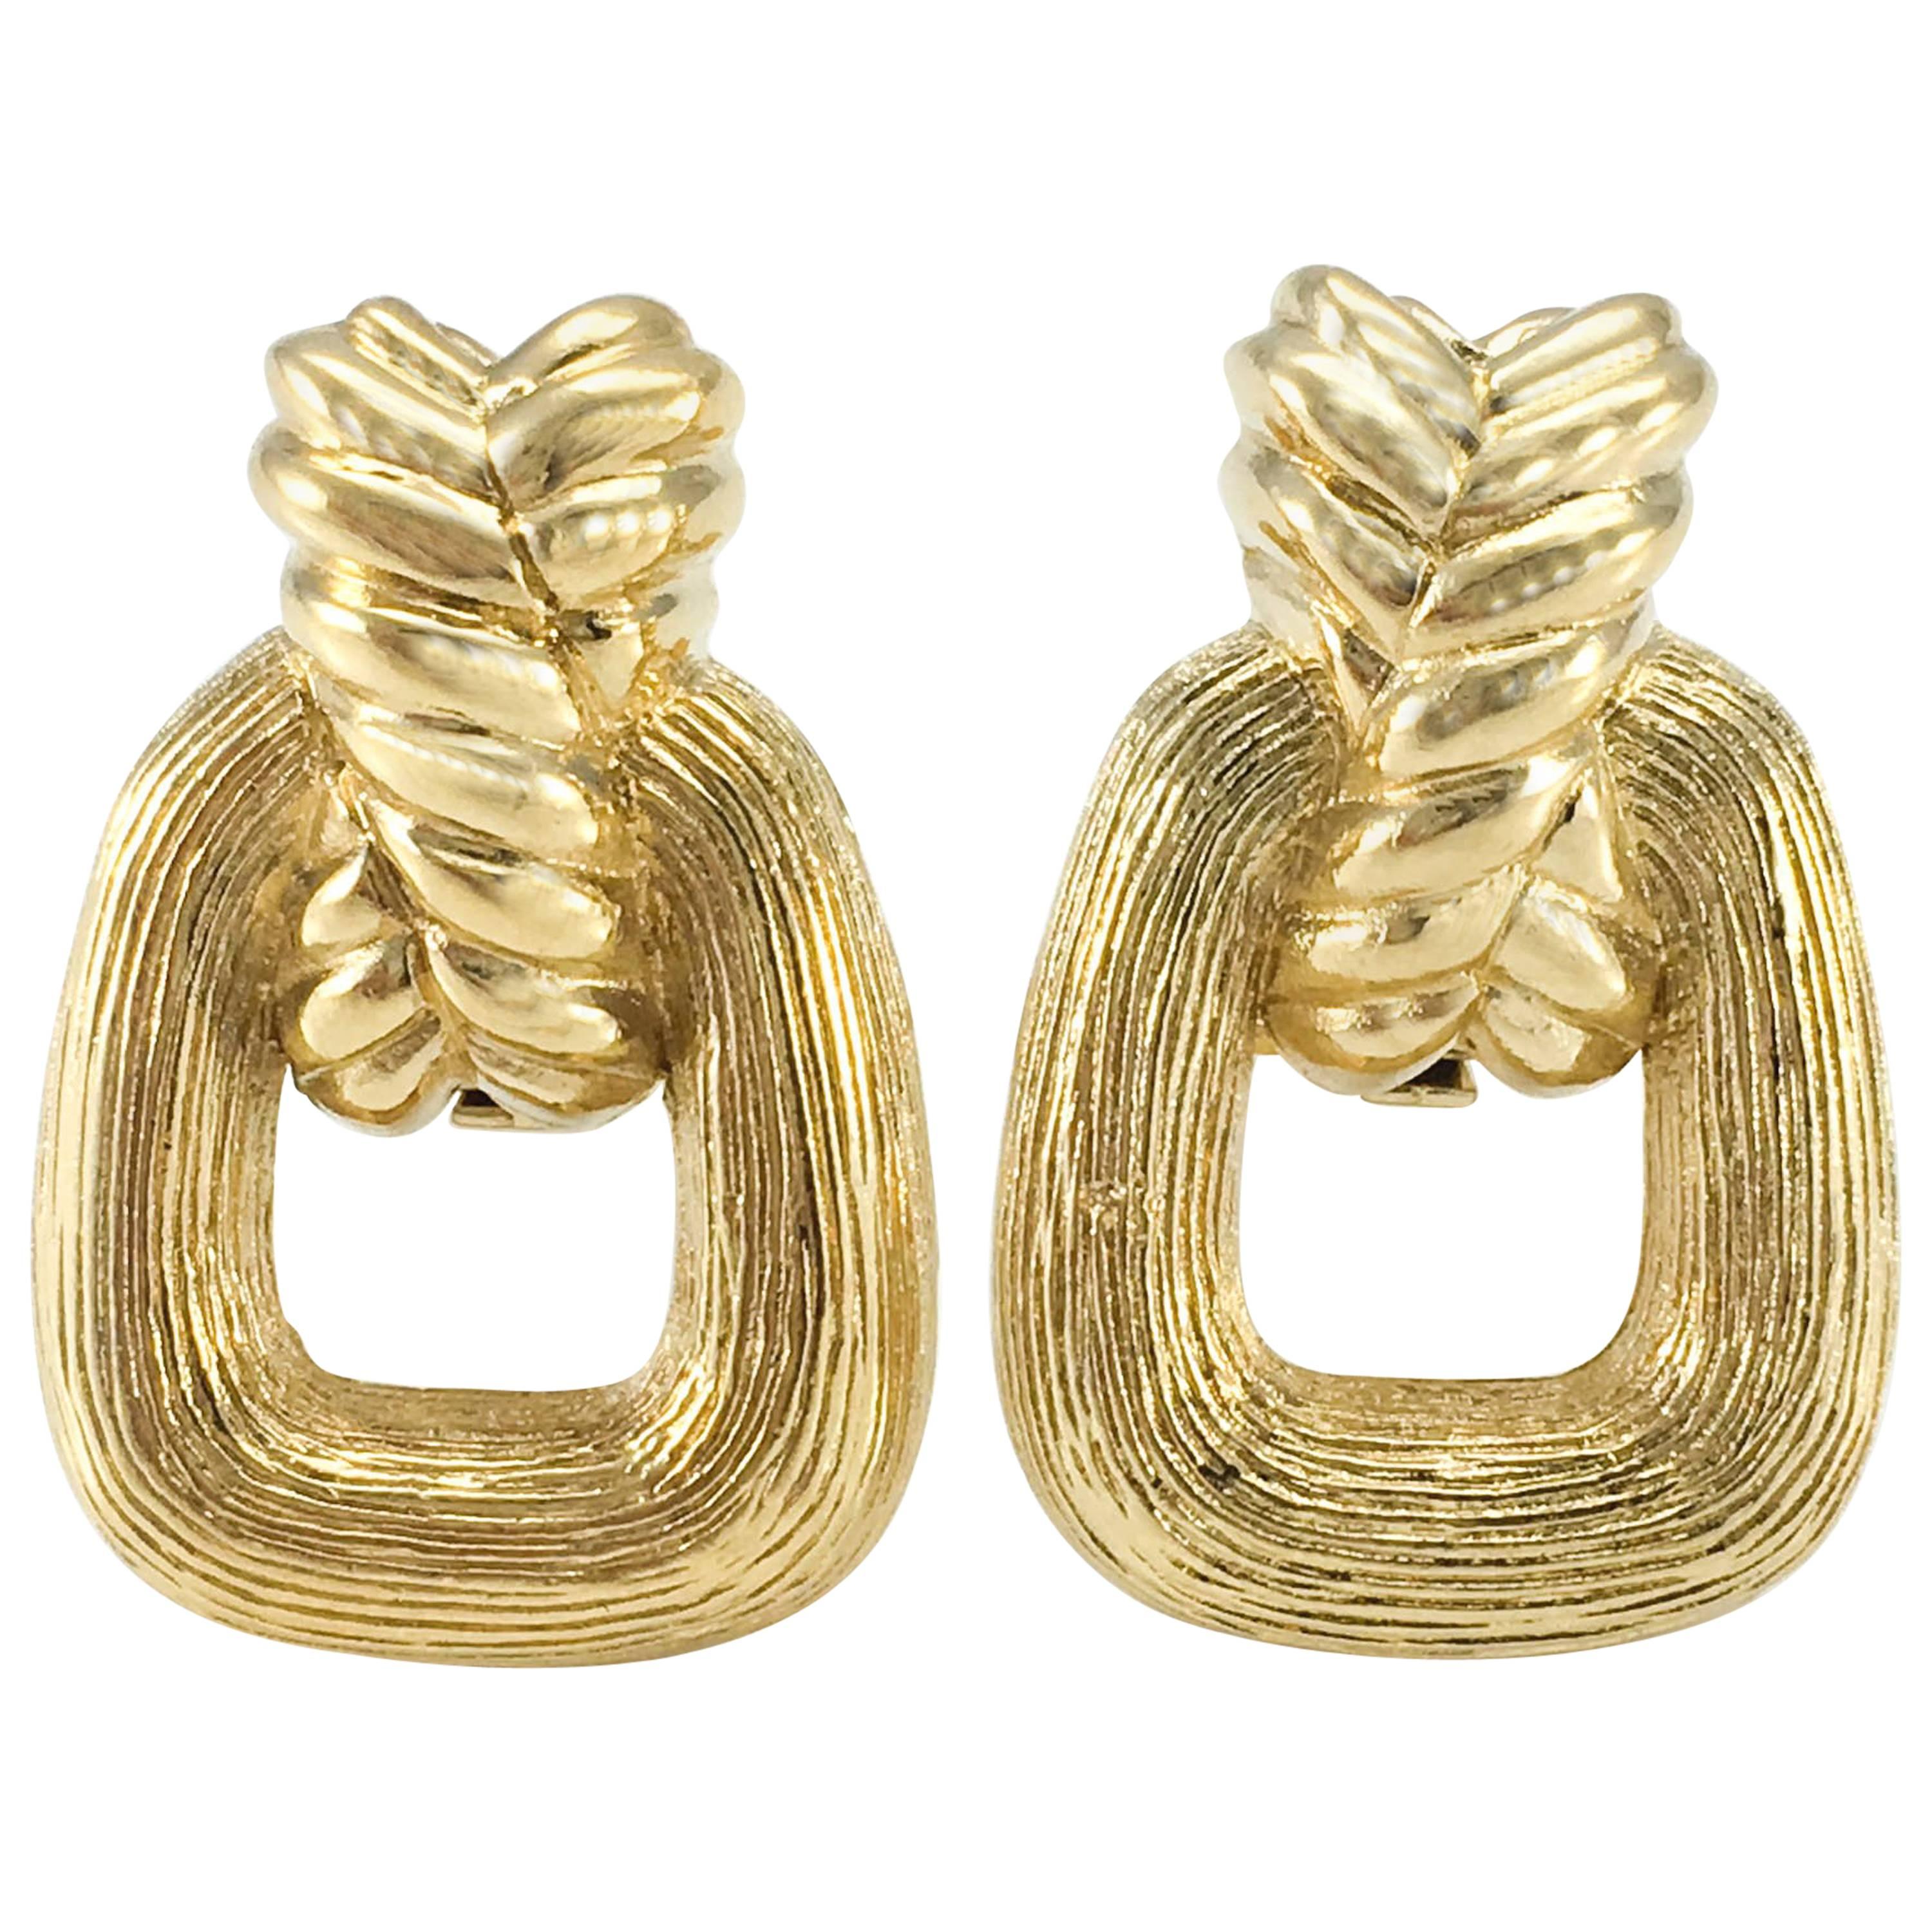 1980s Dior Gold-Tone Clip-On Earrings